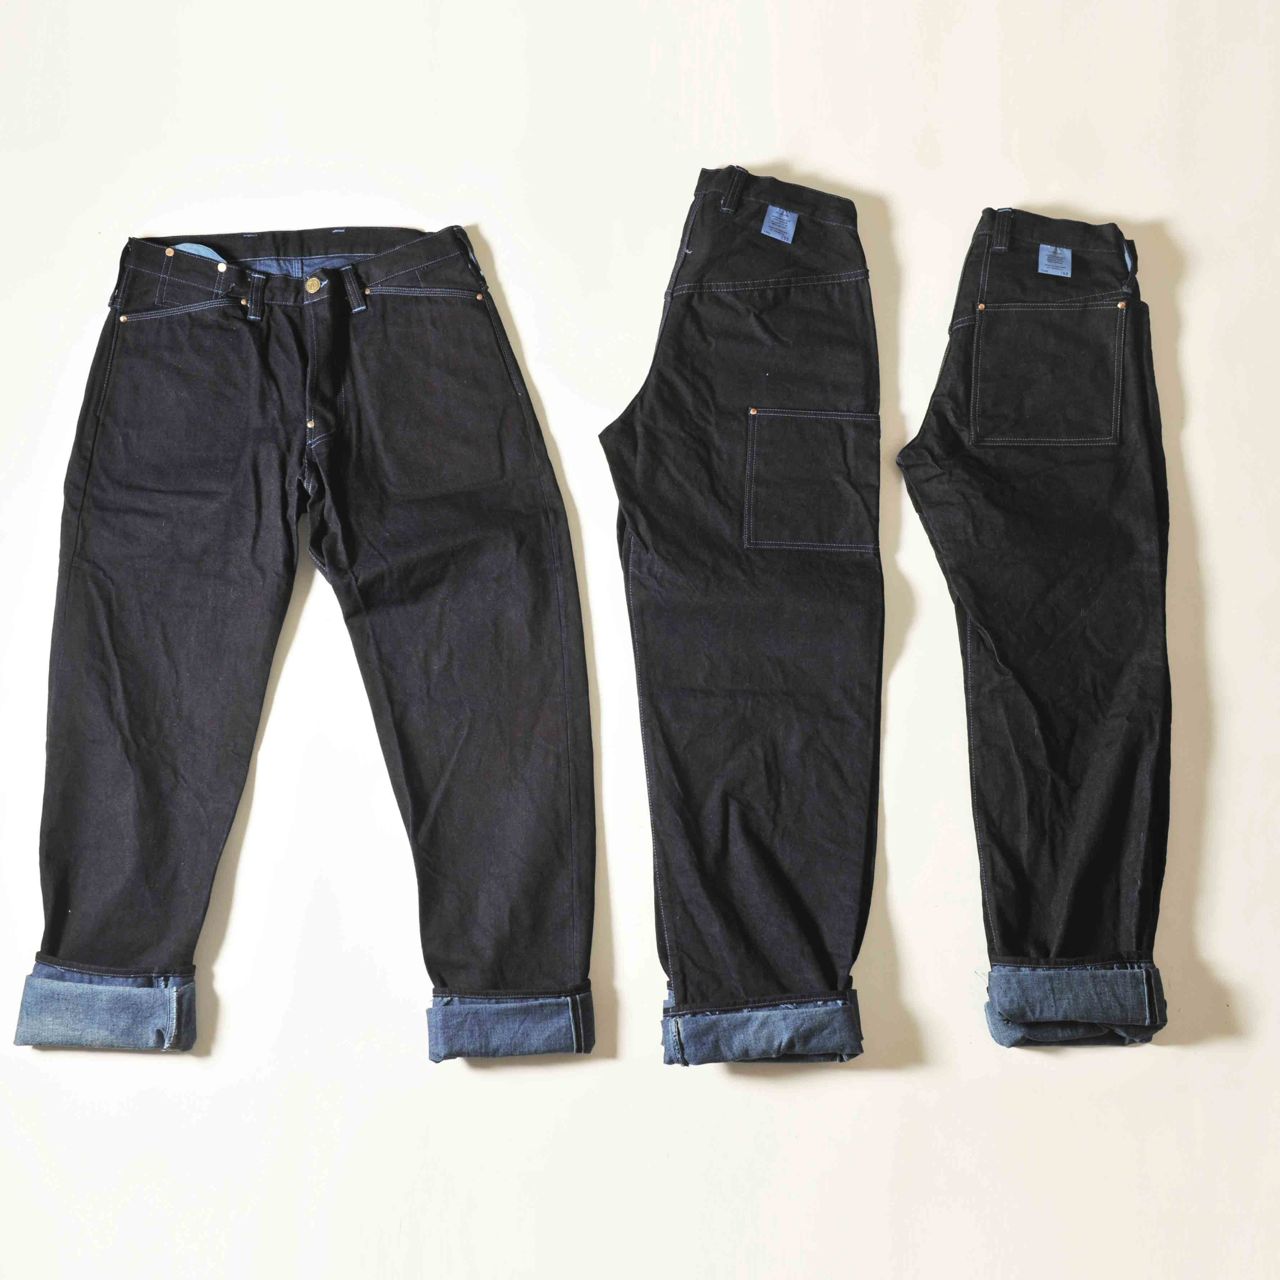 TENDER CO.】 TYPE 130 TAPERED JEANS Col : Woad Size : 2 , 3 , 4